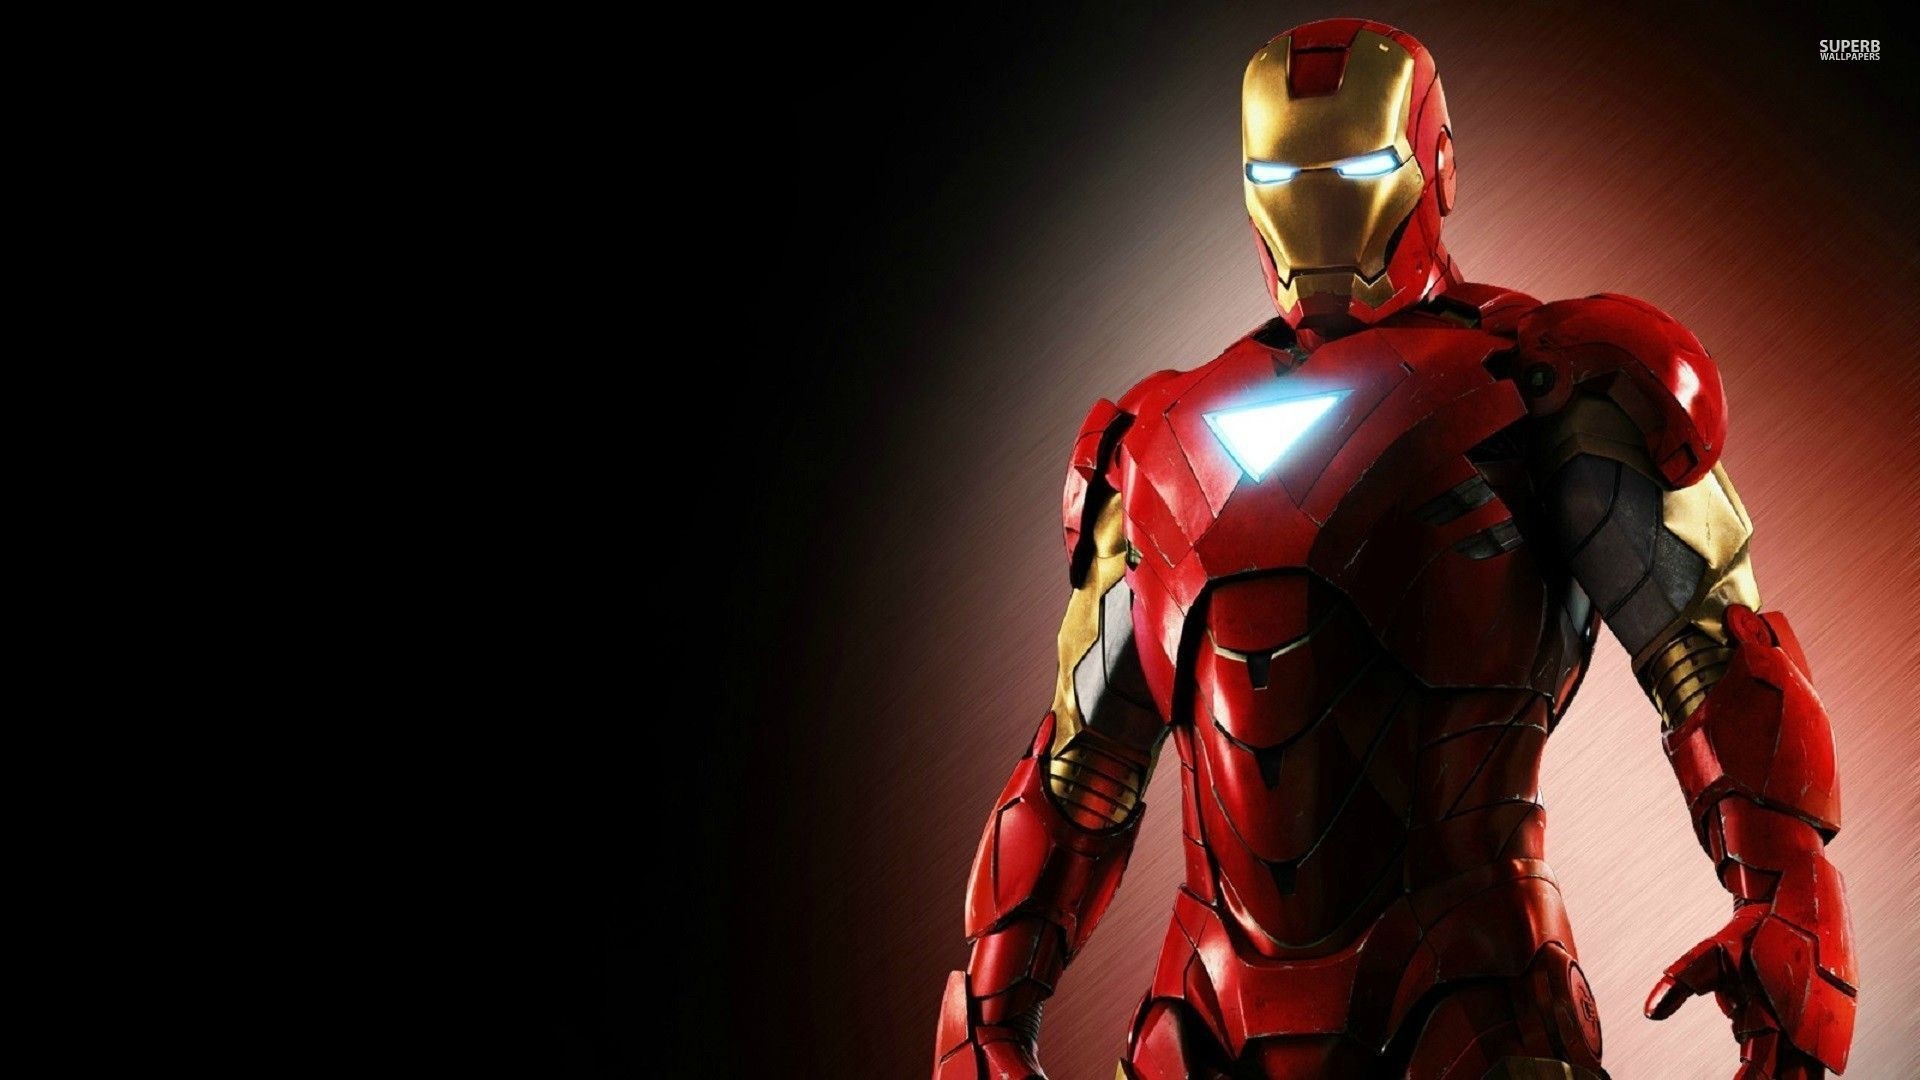 Iron Man Hd Wallpapers 1080p 72 Images